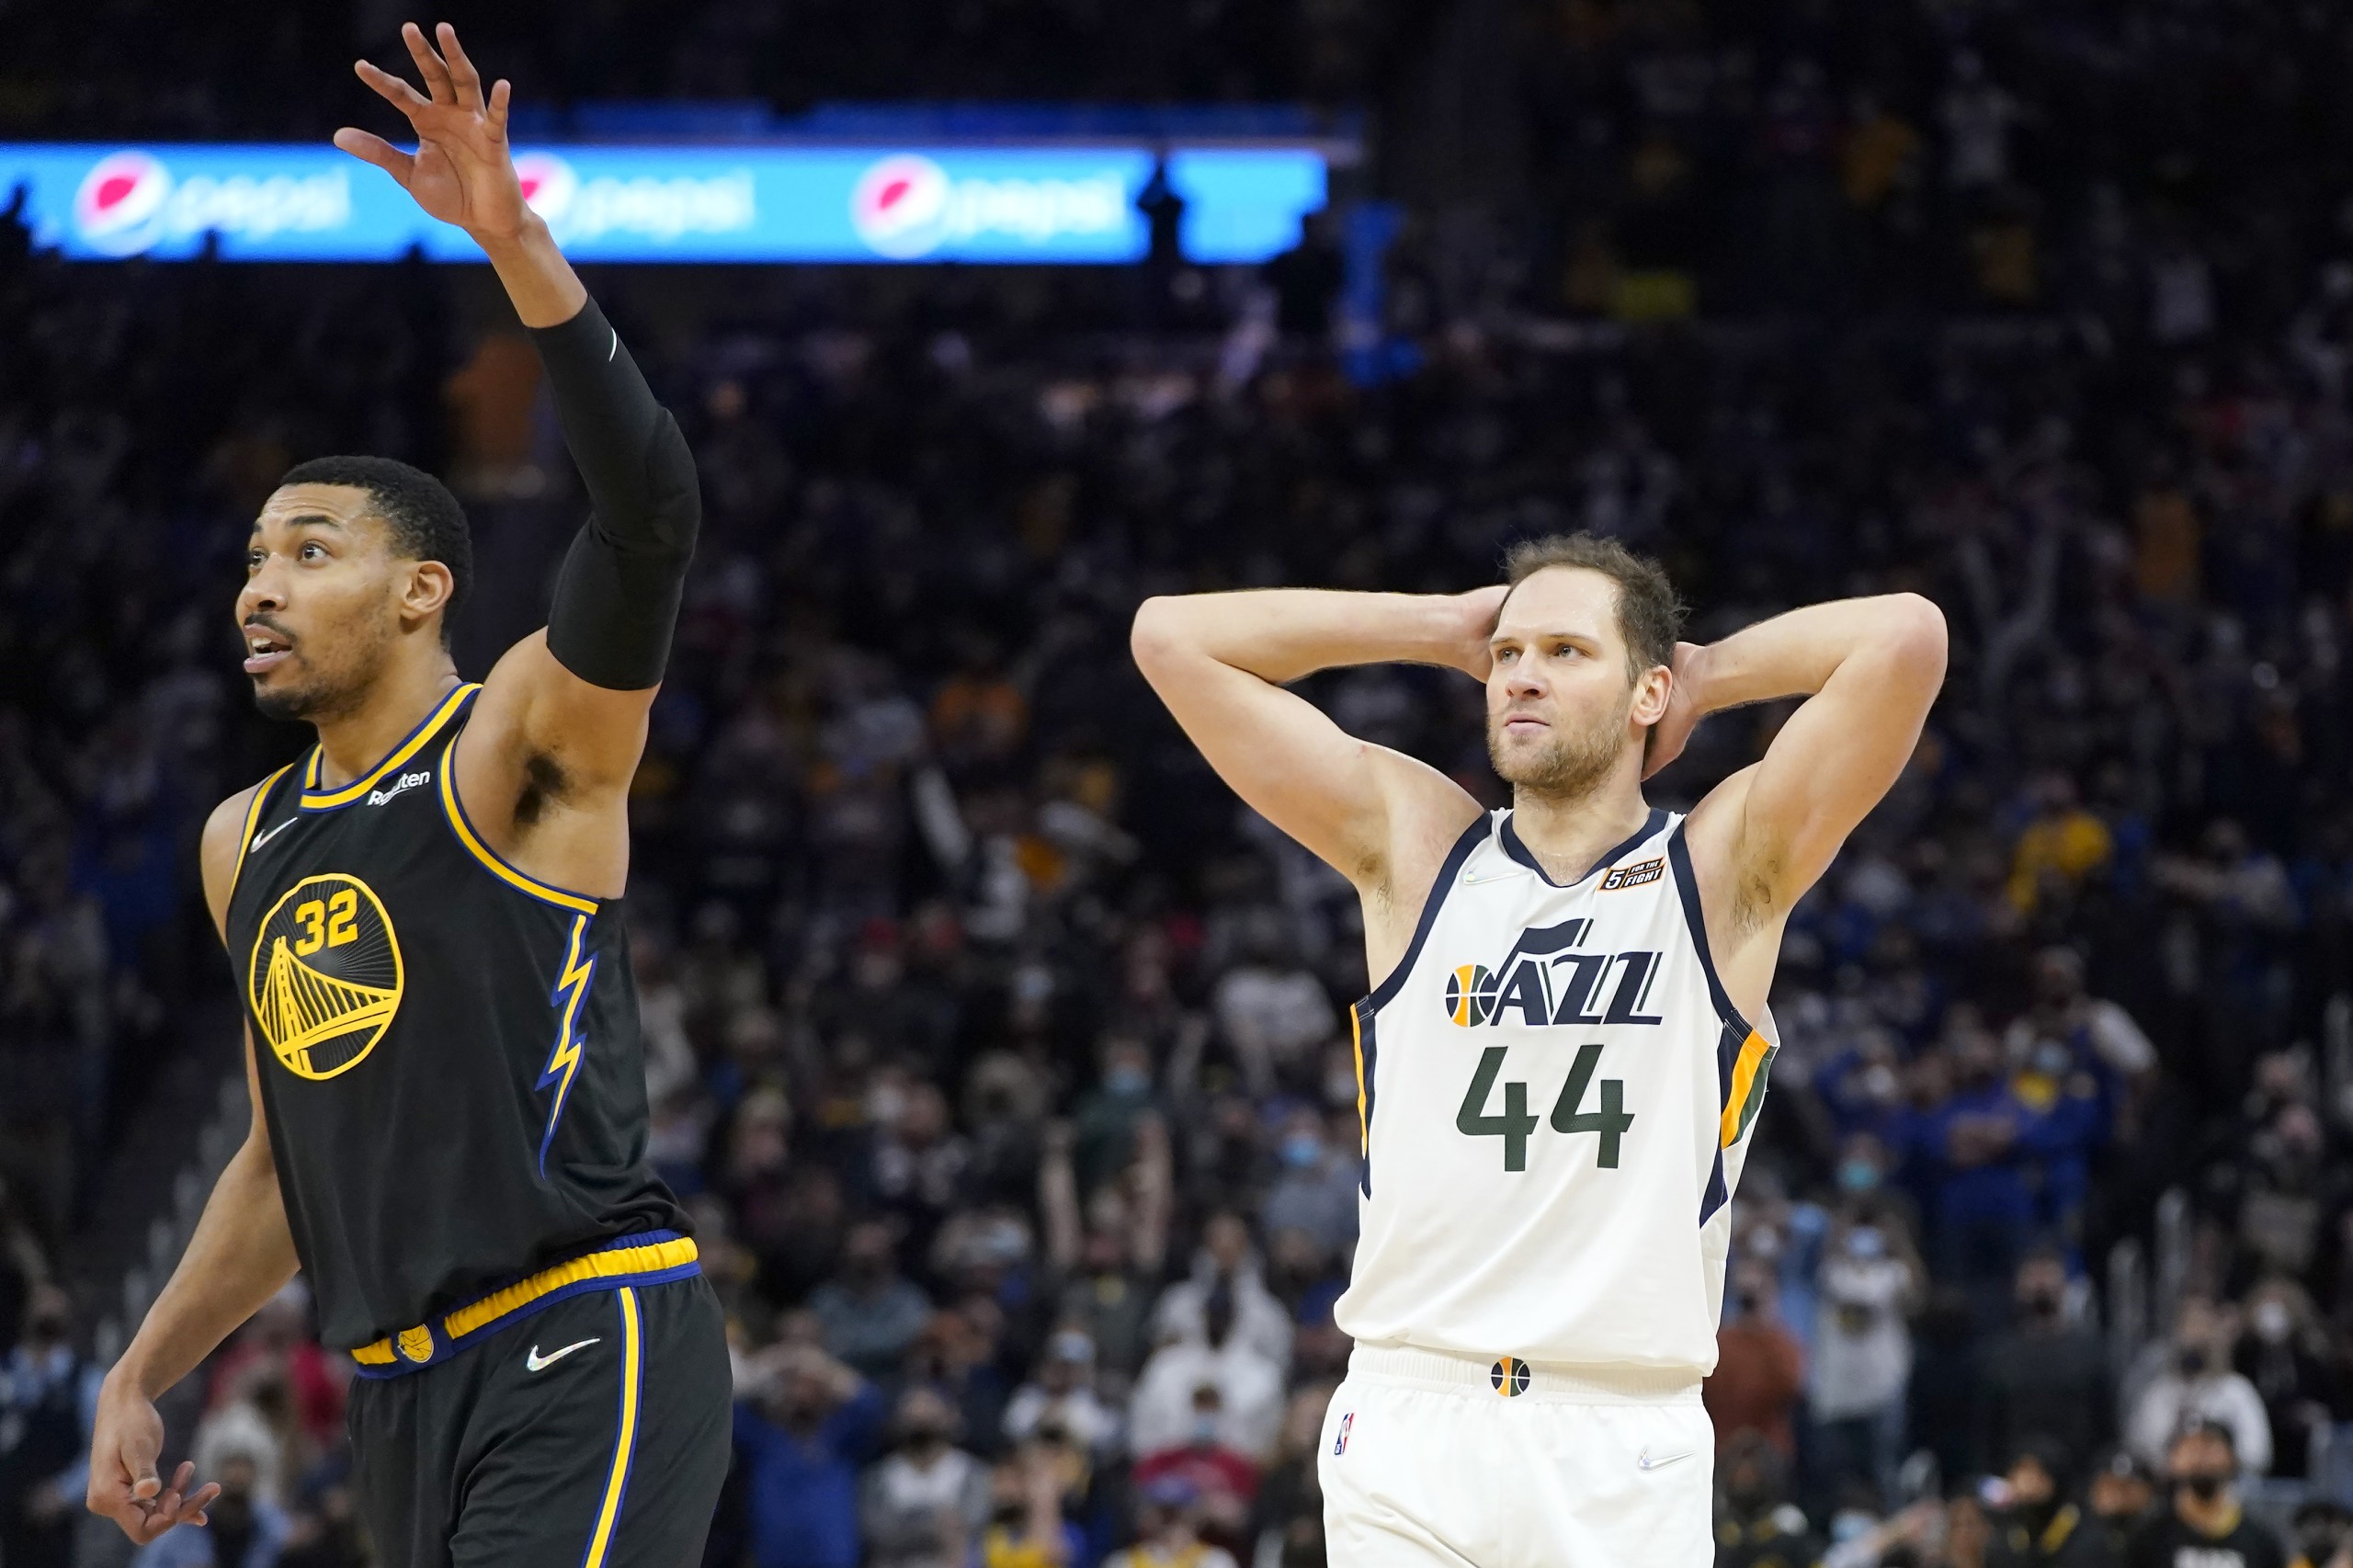 Utah Jazz forward Bojan Bogdanovic (44) reacts as he watches a missed shot next to Golden State Warriors forward Otto Porter Jr. (32) during the second half of an NBA basketball game in San Francisco, Sunday, Jan. 23, 2022. (AP Photo/Jeff Chiu)